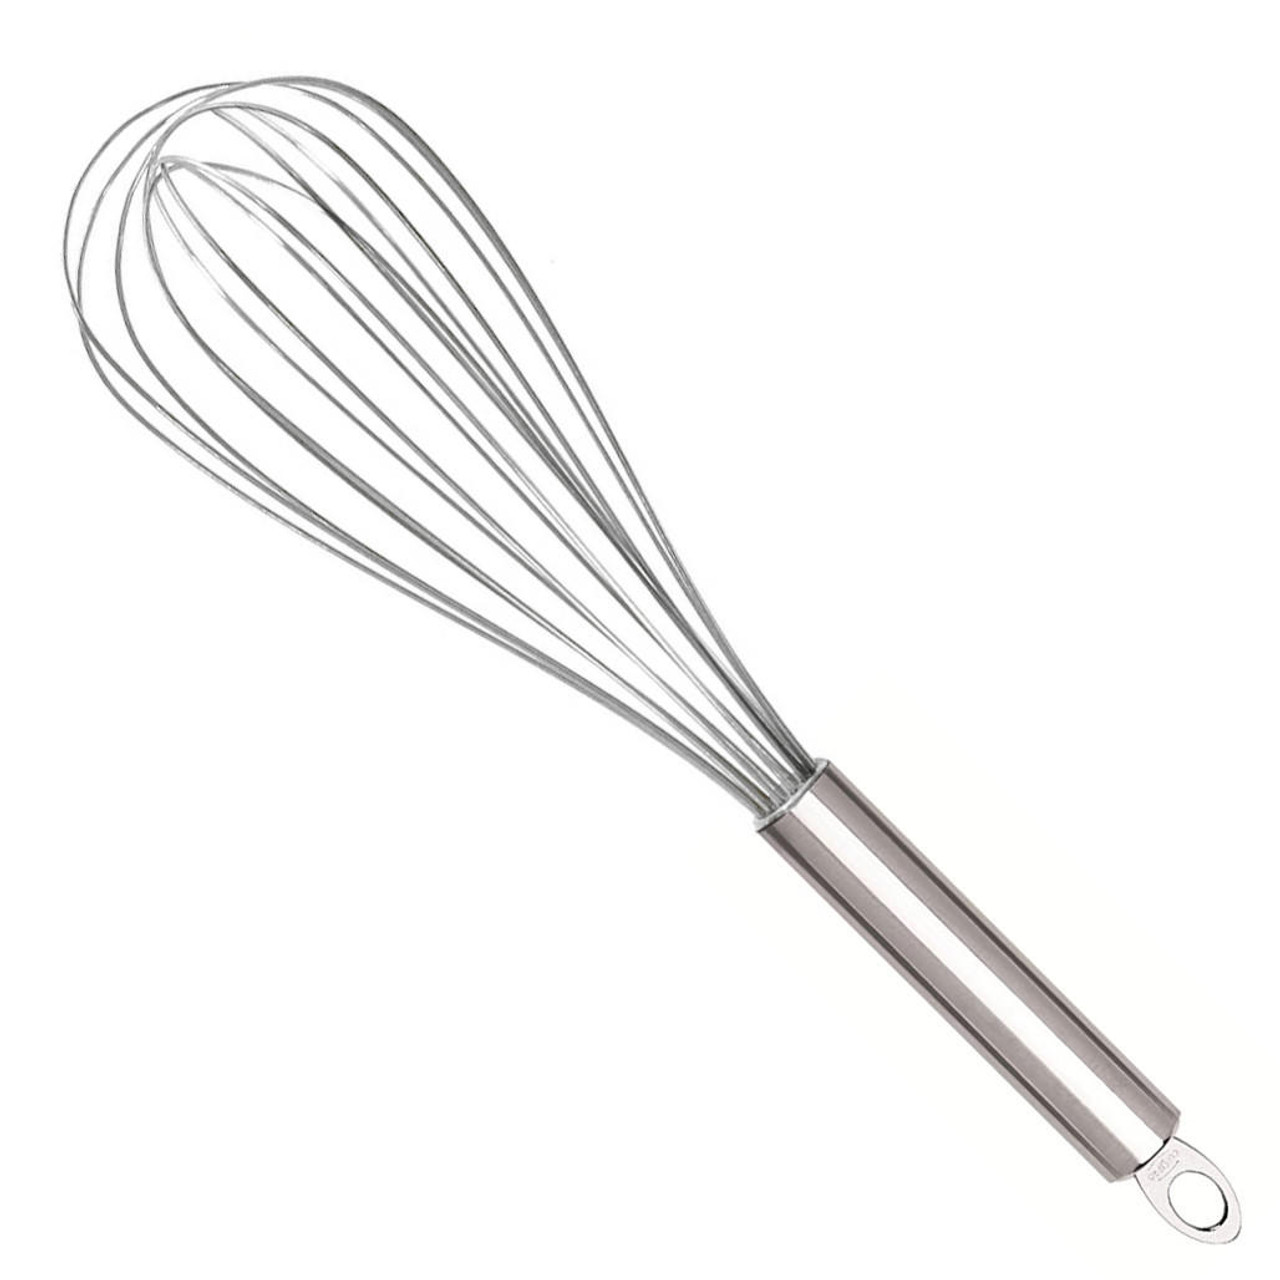 https://cdn11.bigcommerce.com/s-p82jn6co/images/stencil/1280x1280/products/14390/40648/54334-cuisipro-balloon-whisk-stainless-steel-10-in__31925.1692814190.jpg?c=2